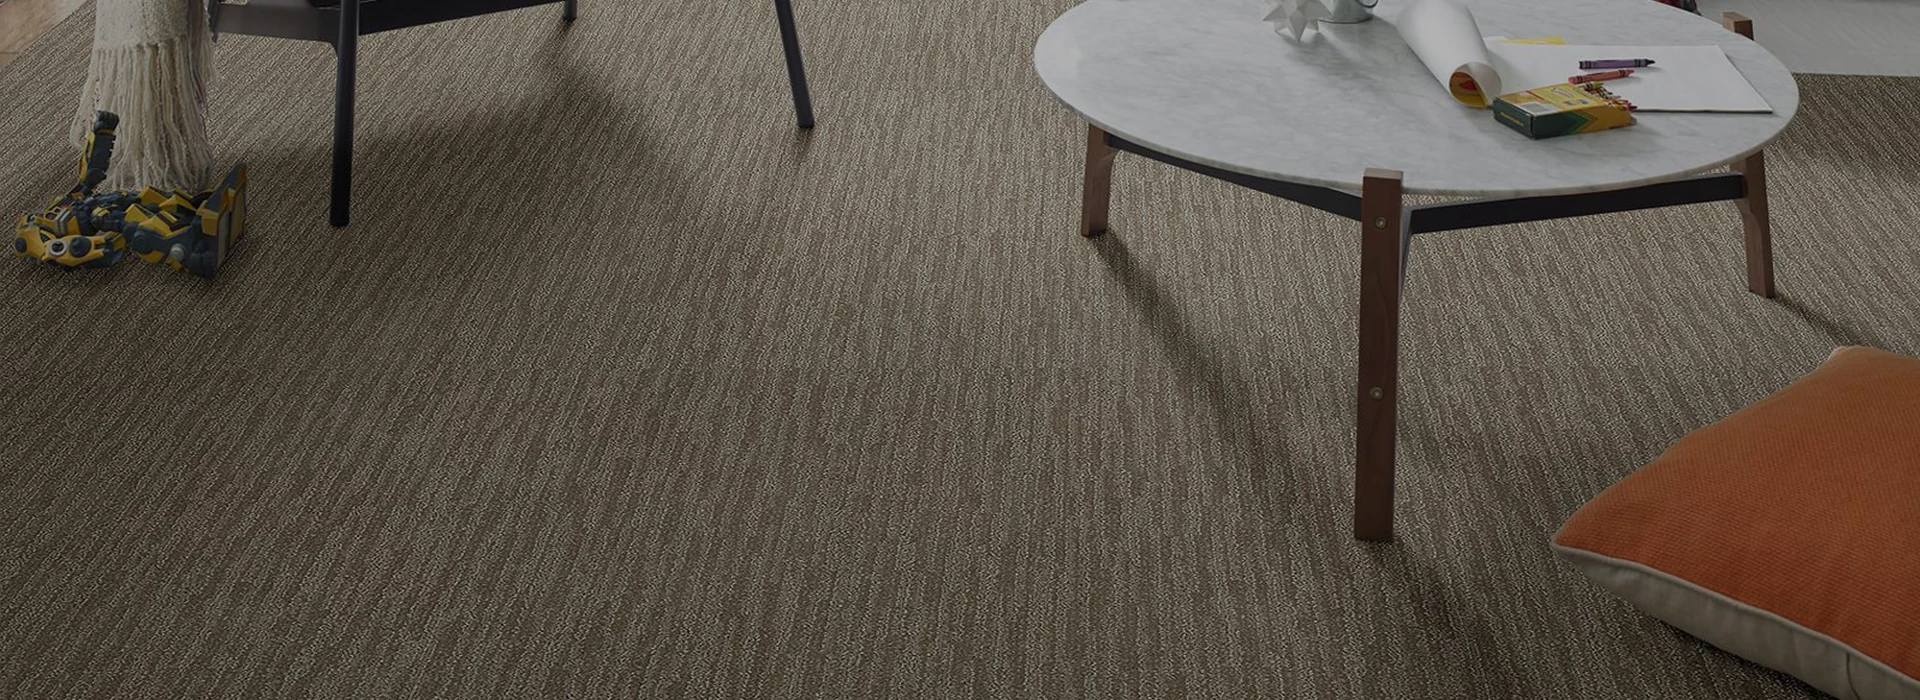 Carpet Tile room scene with a small table on the right side